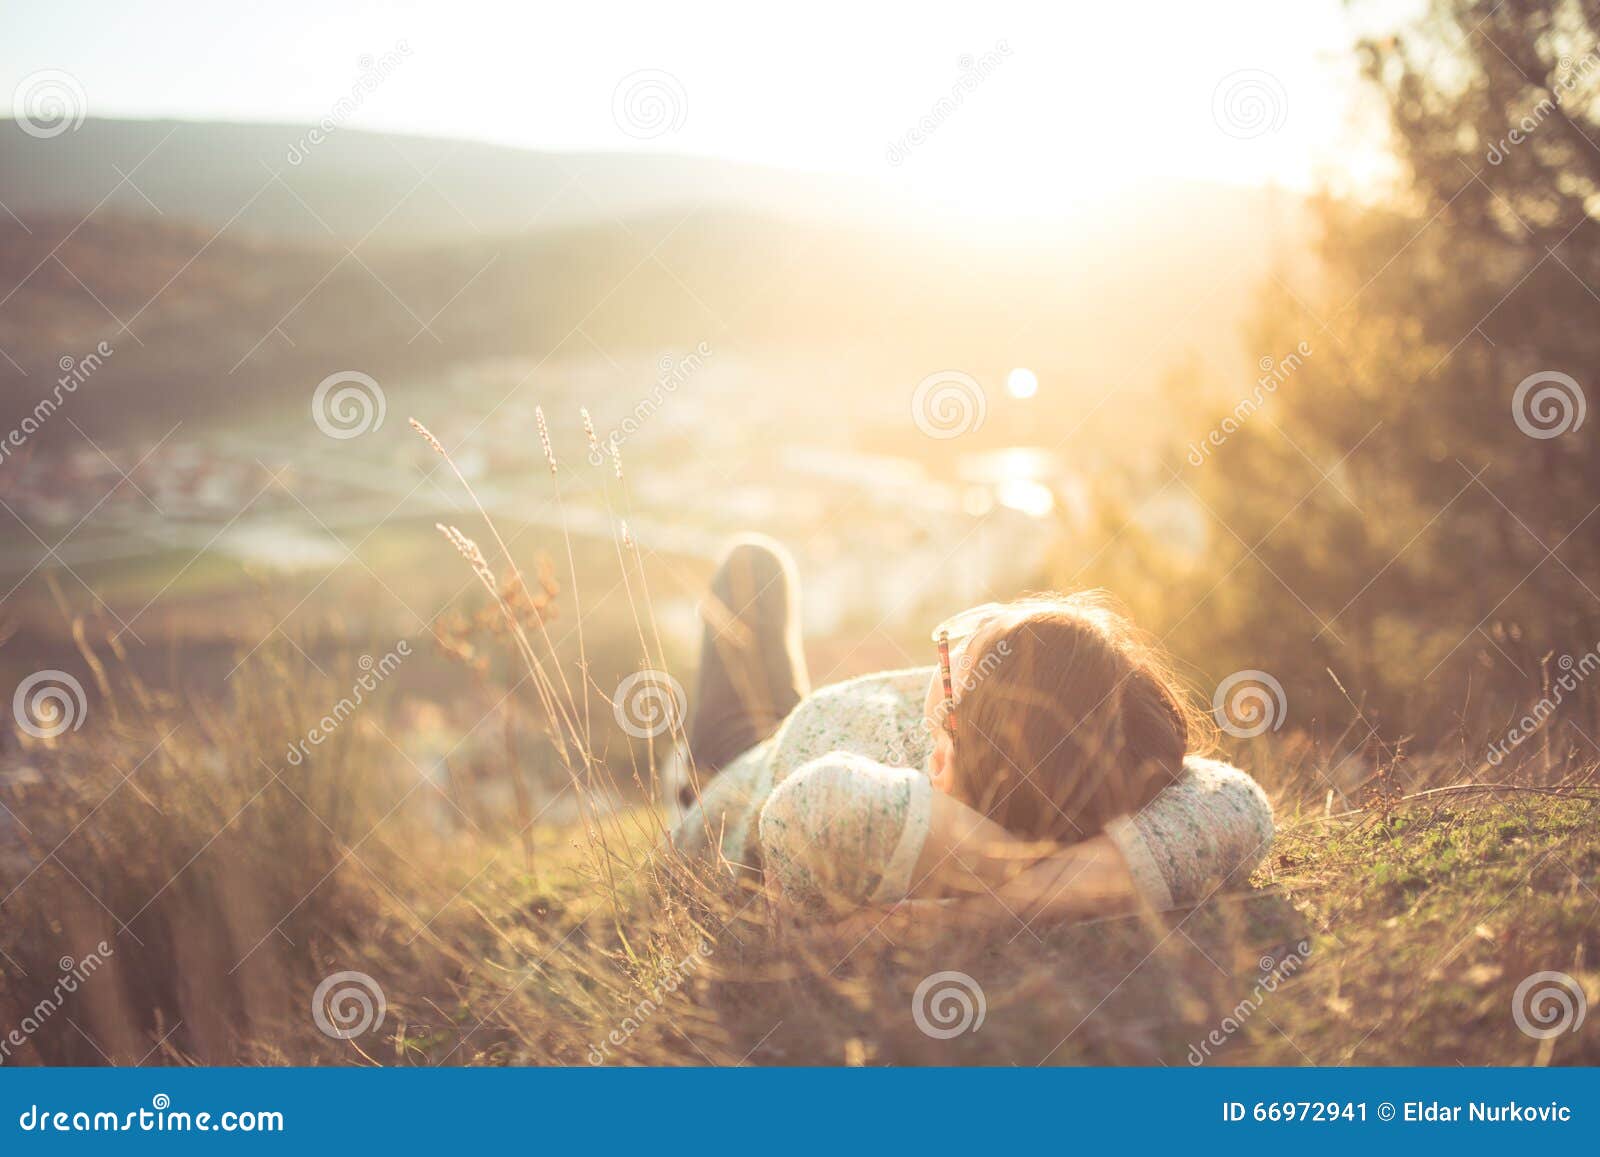 carefree happy woman lying on green grass meadow on top of mountain edge cliff enjoying sun on her face. enjoying nature sunset